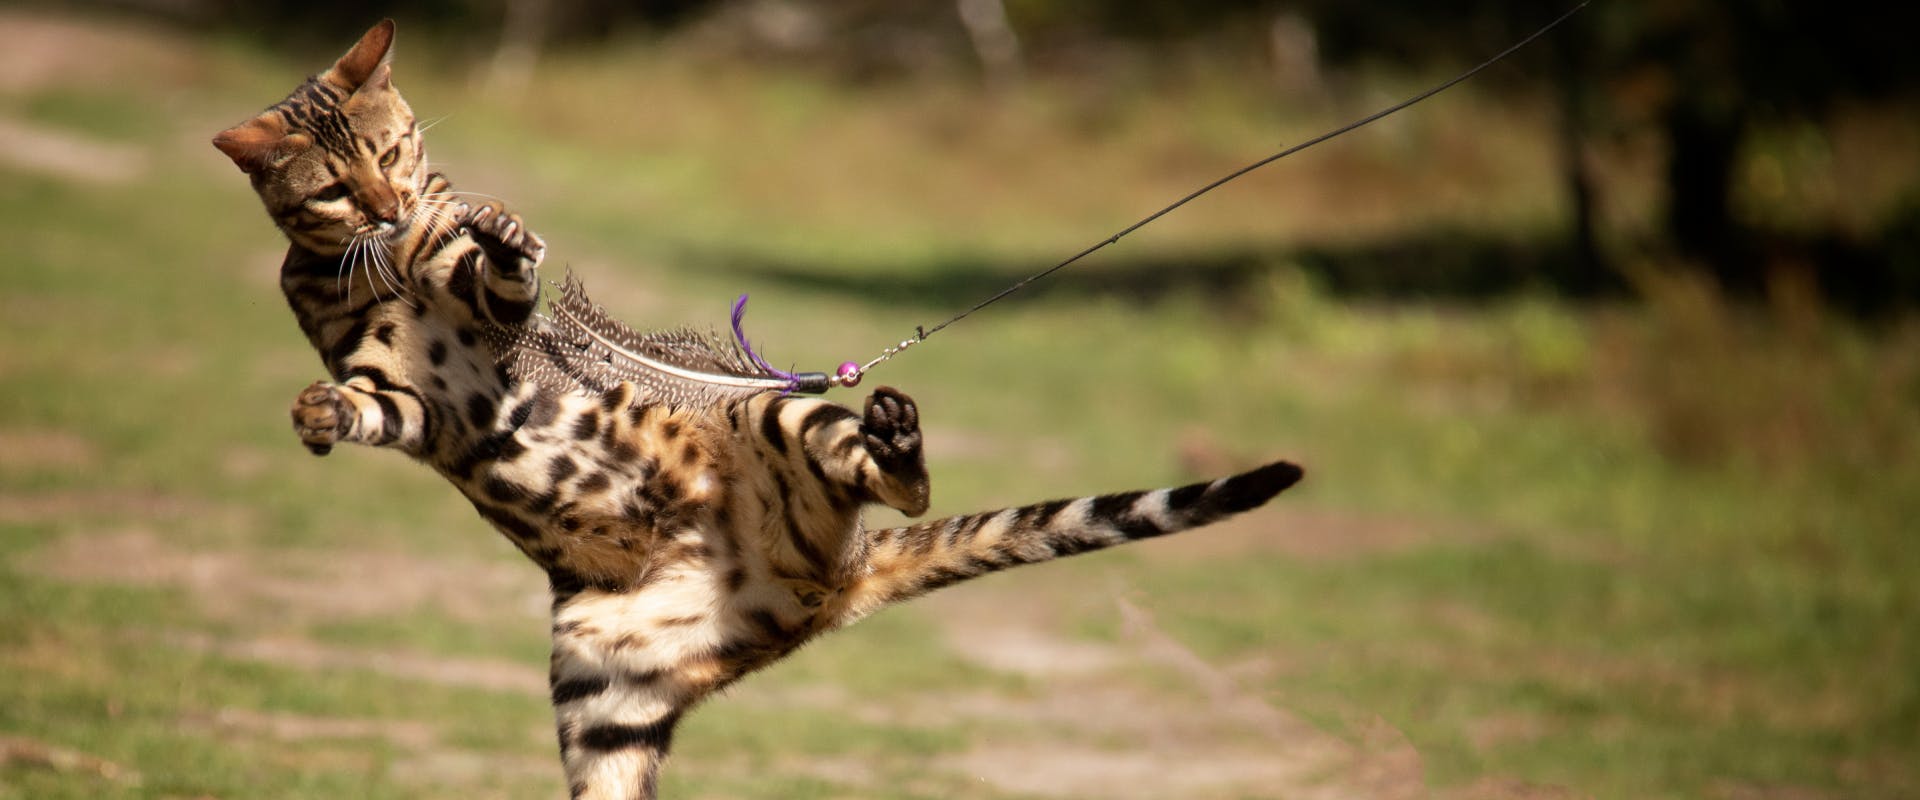 bengal cat in mid-air trying to catch a feather teaser